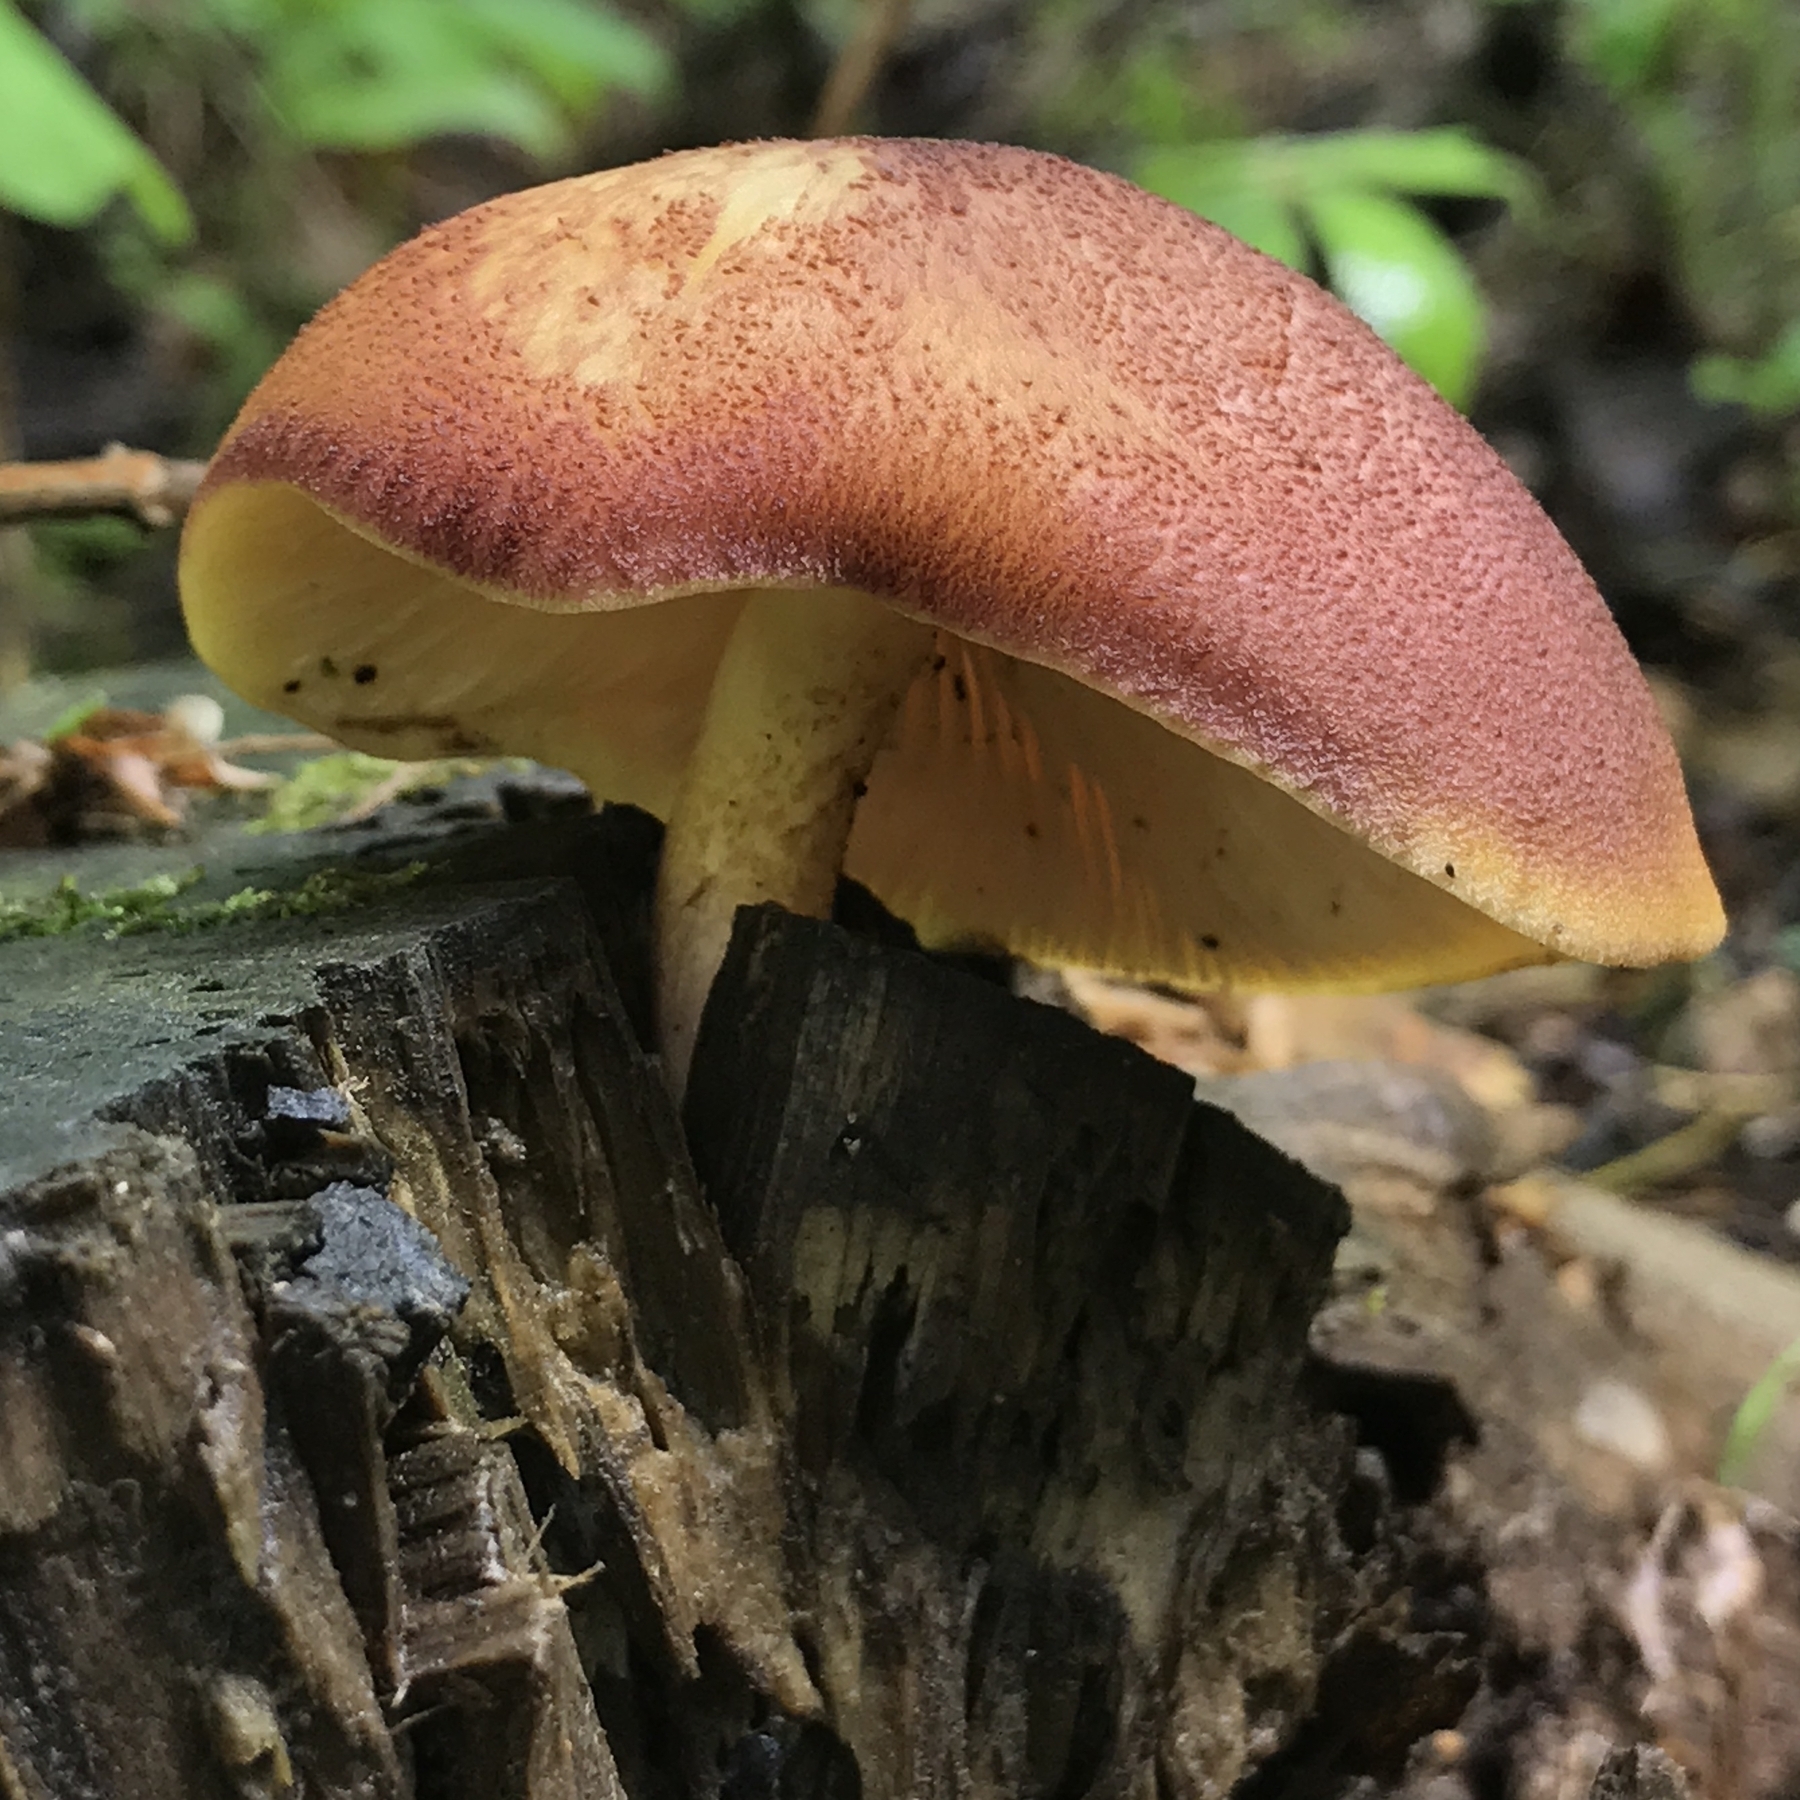 Orange topped mushroom growing out of a tree stump